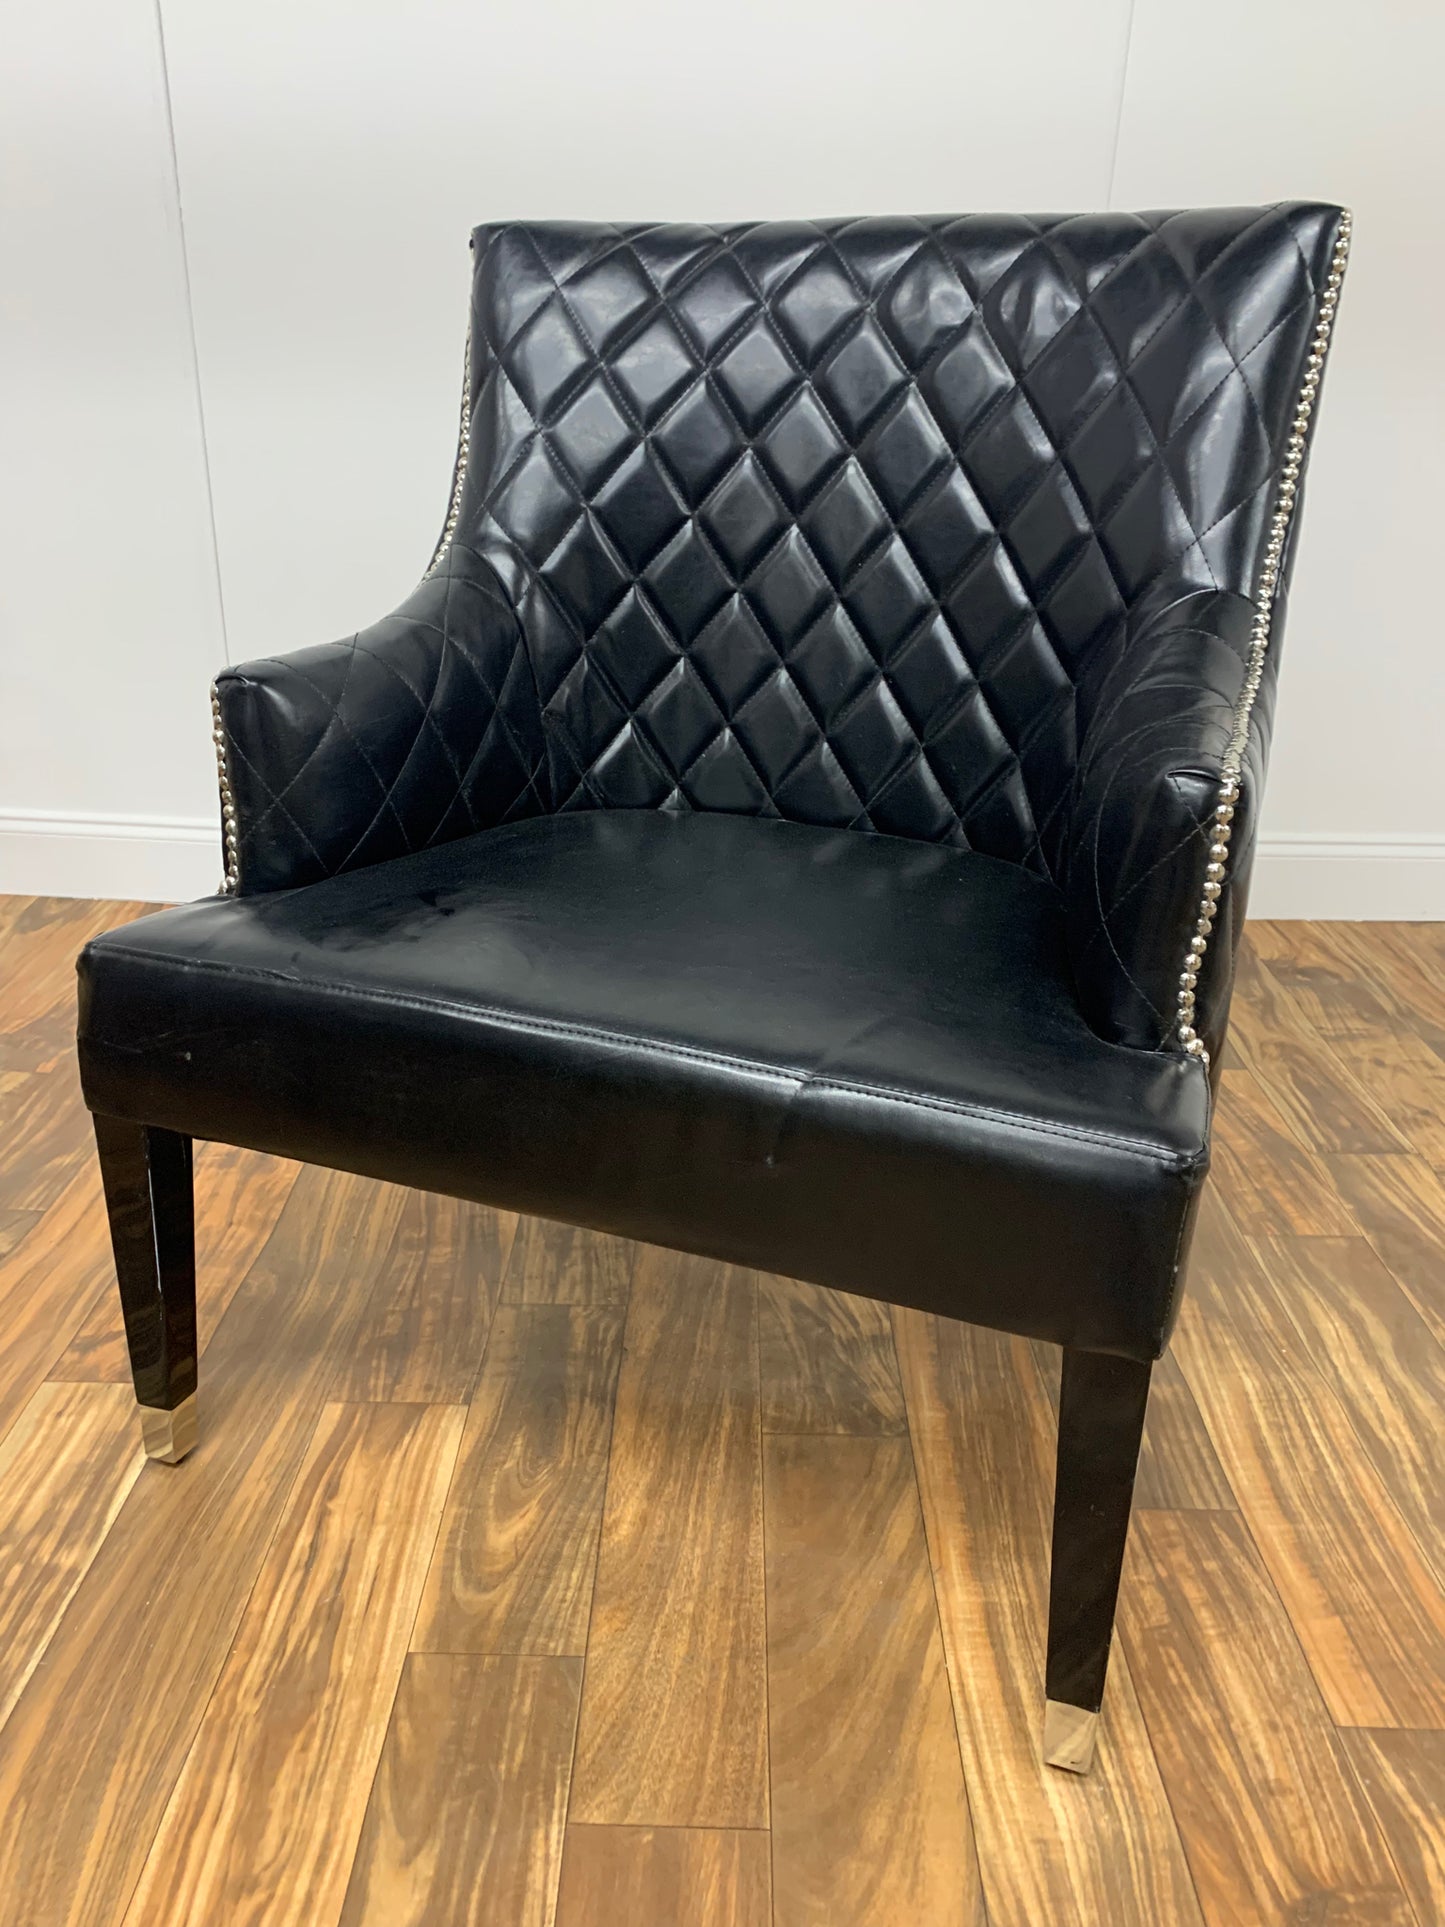 TUFTED BLACK LEATHER WINGBACK CHAIR WITH SILVER RIVETS